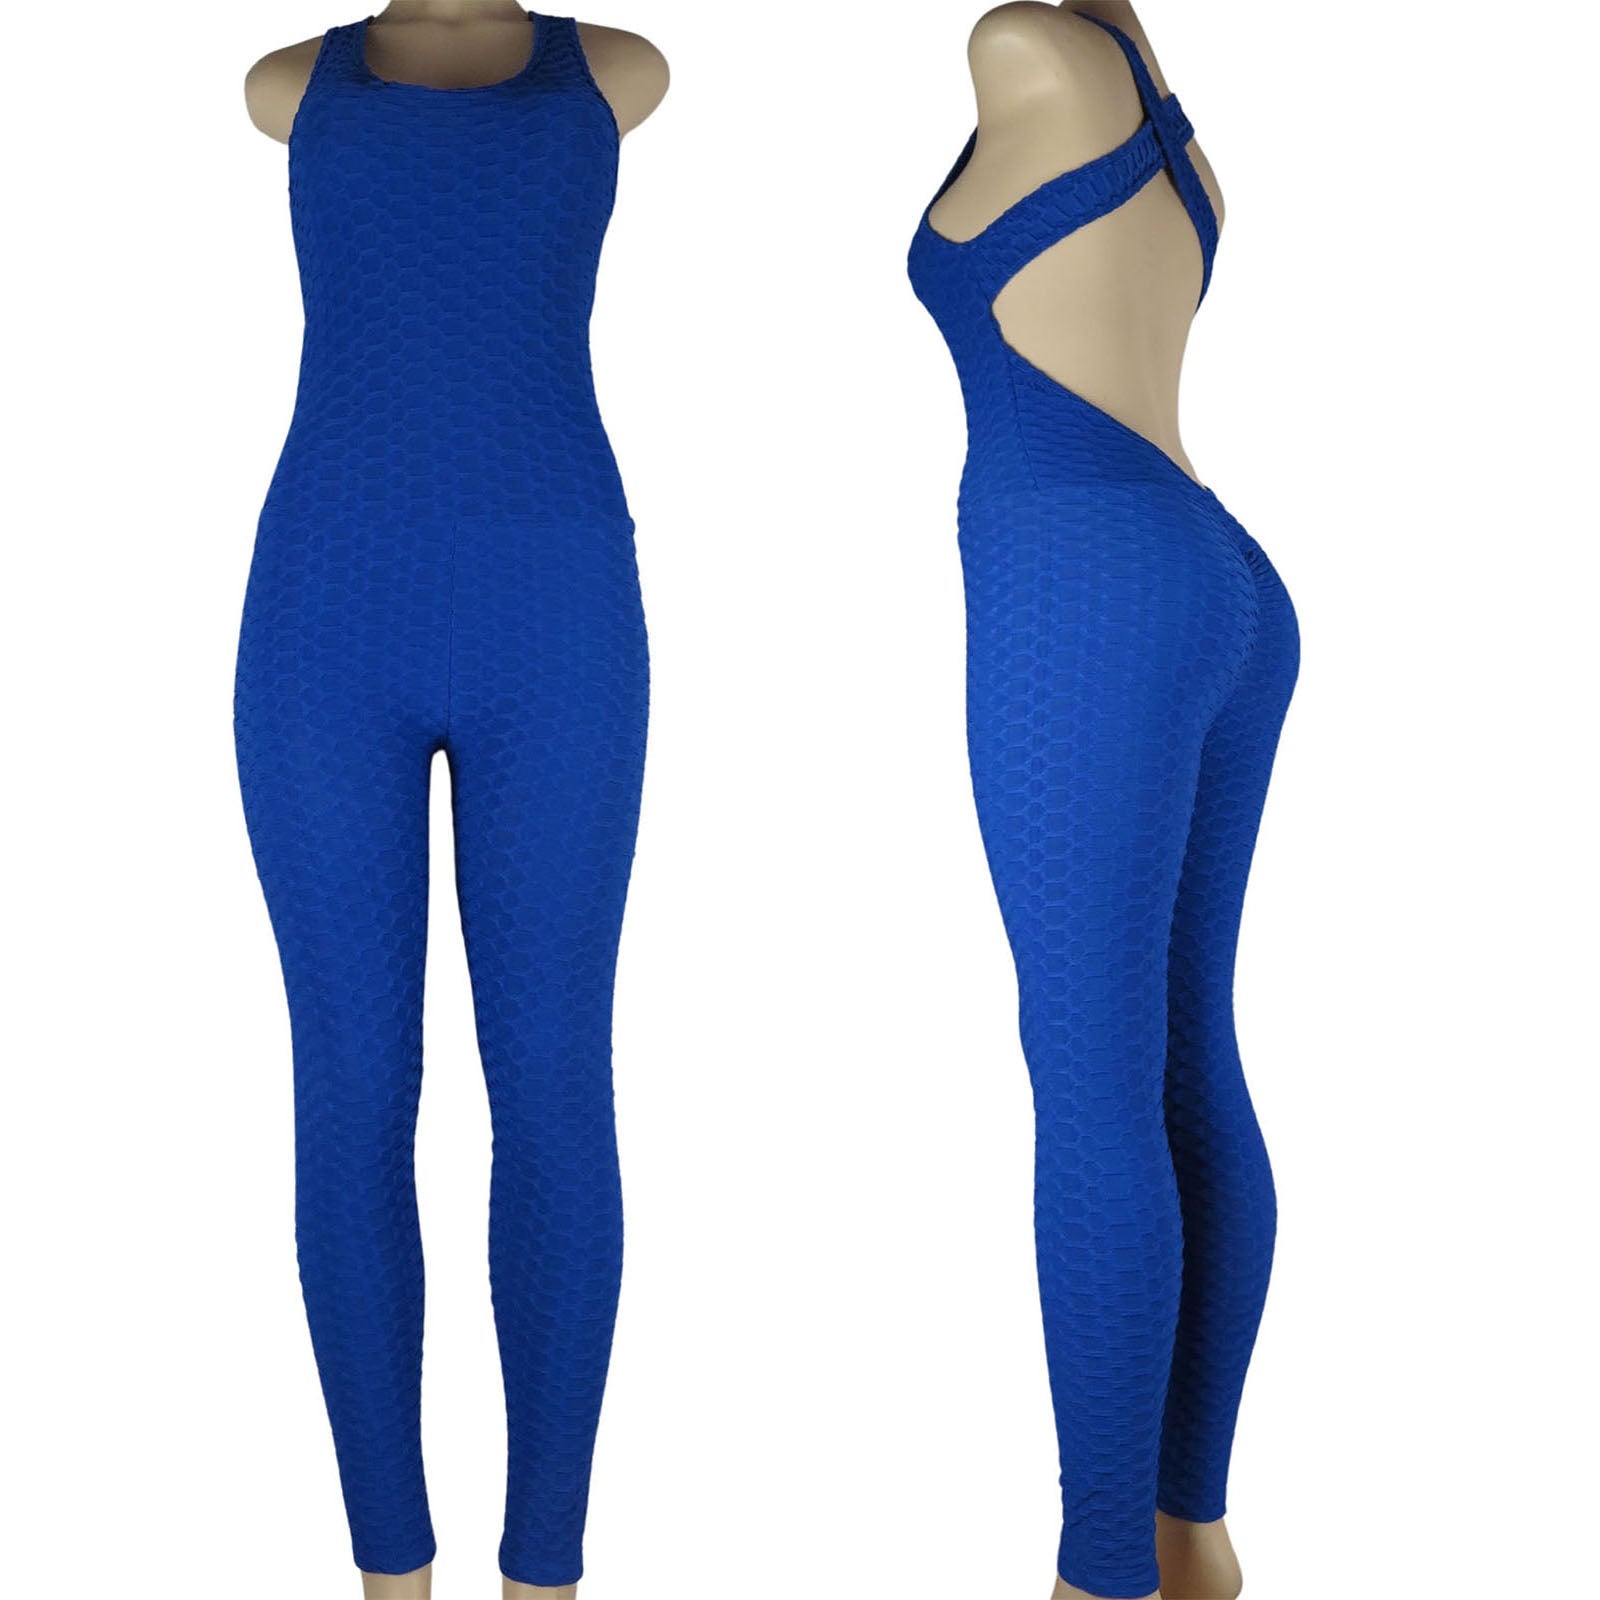 Women's Spandex Jersey Leggings, Made in USA. Quick Shipping